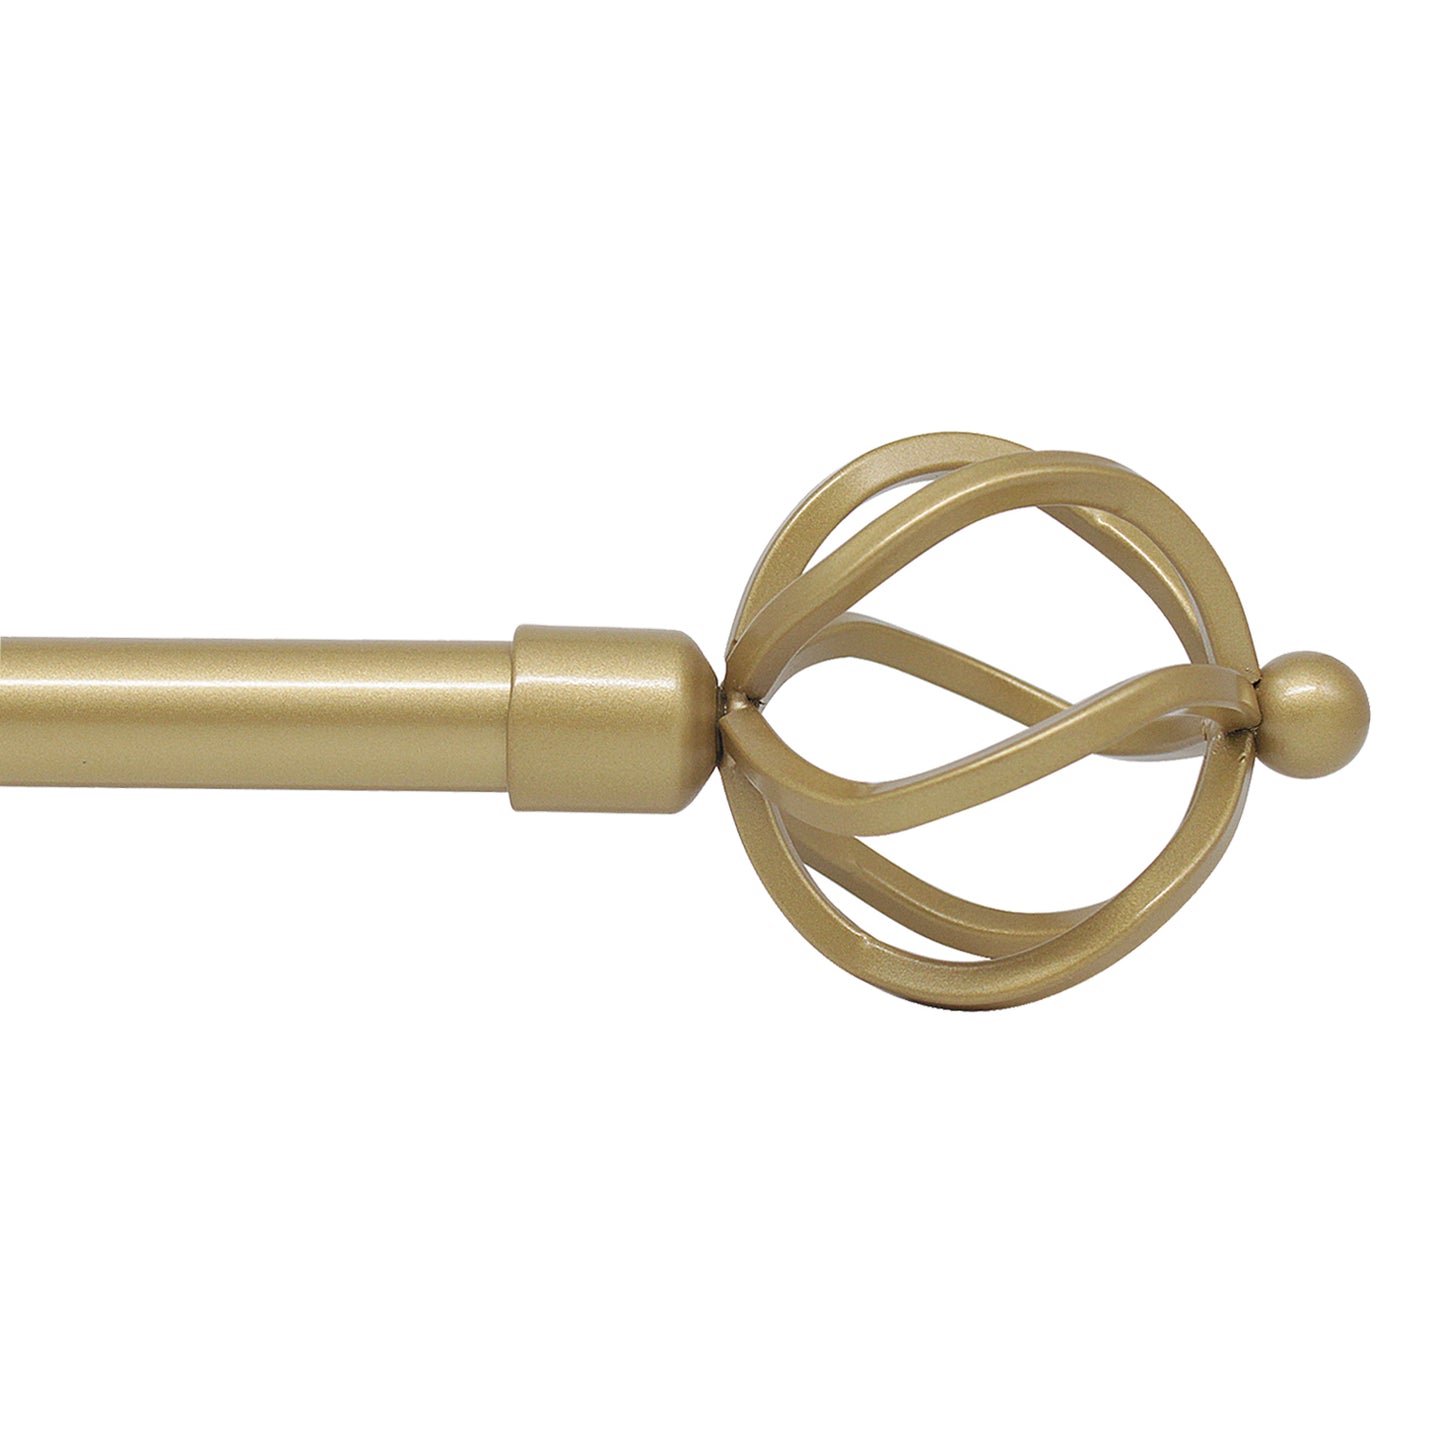 3/4 Inch Golden Curtain Rod Set Diameter 22-42 Inch, Twisted Cage Finials